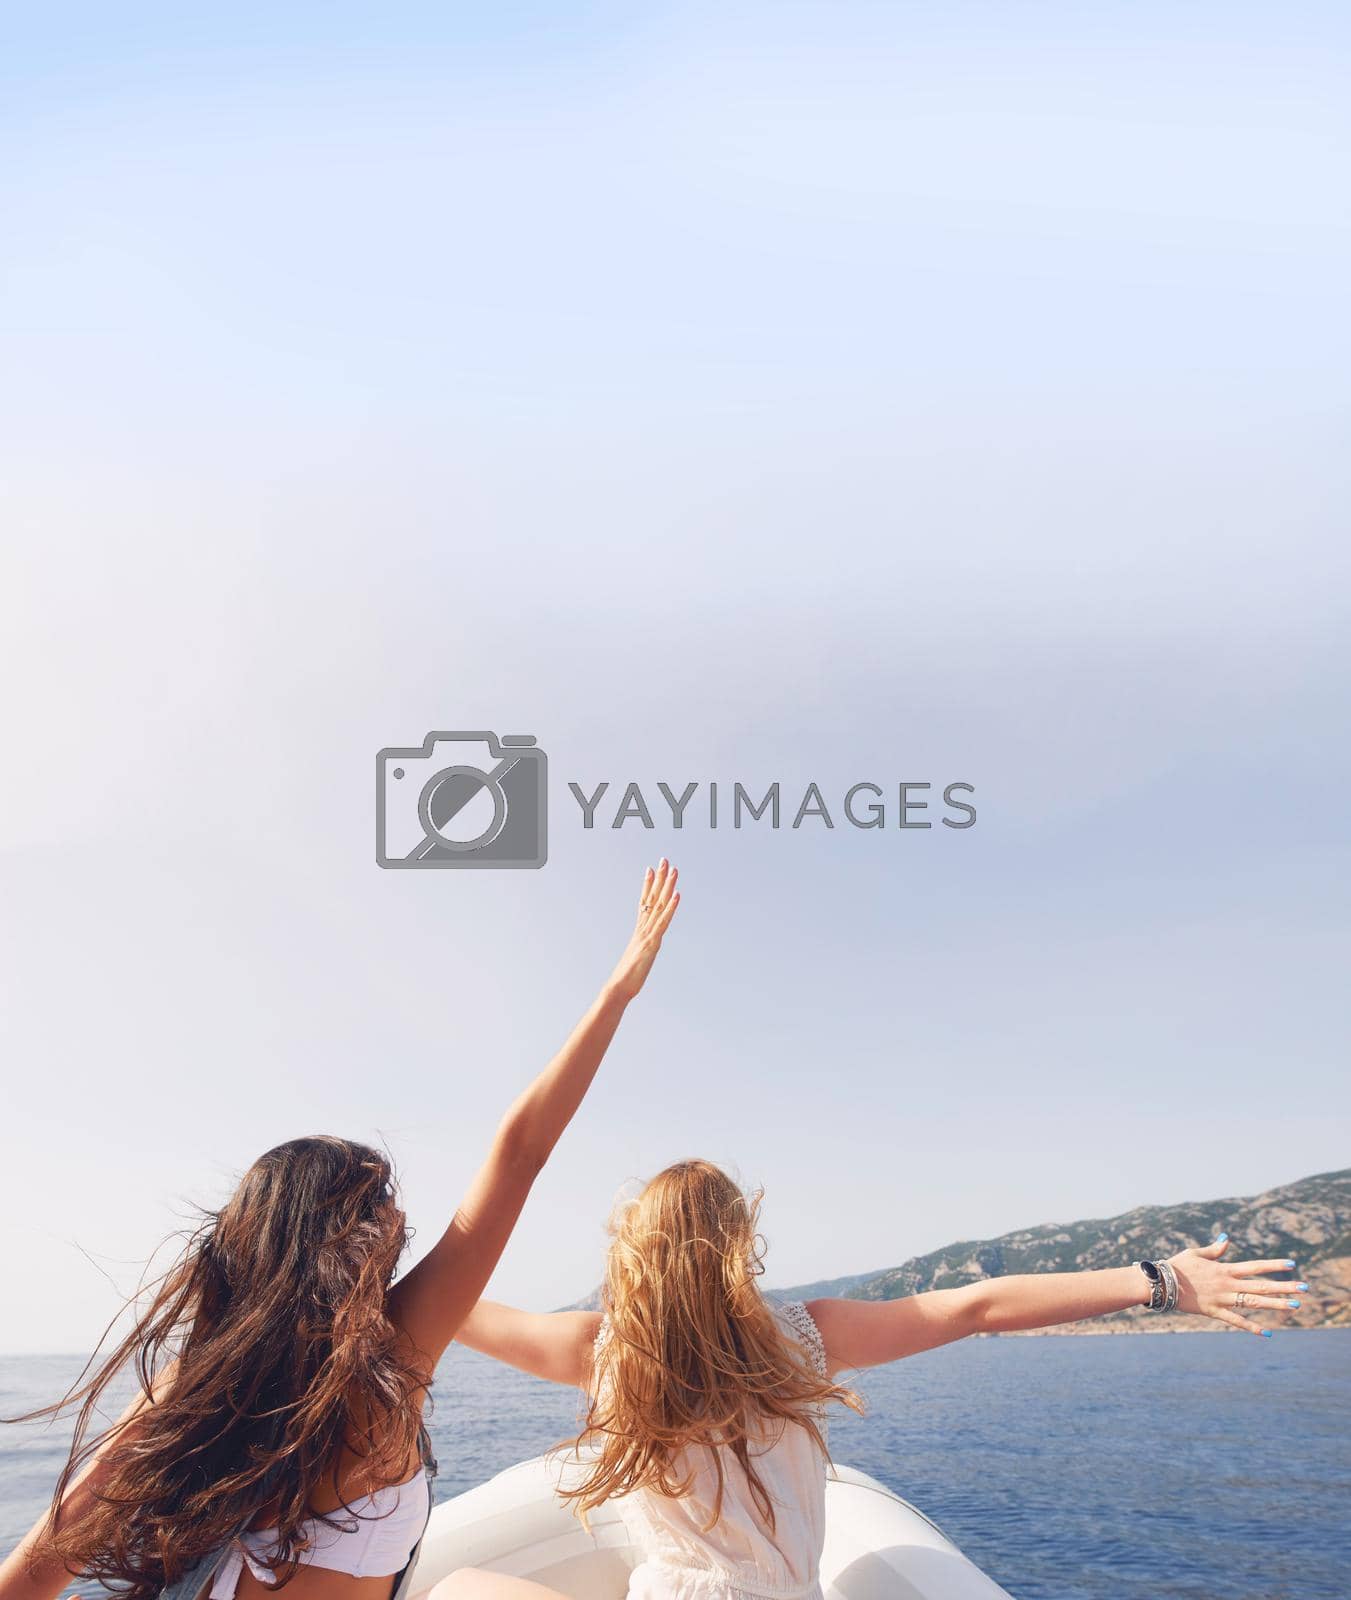 Beautiful girl friends arms raised travel on speed boat to paradise island for relaxing nature tourist destination vacation discover explore.